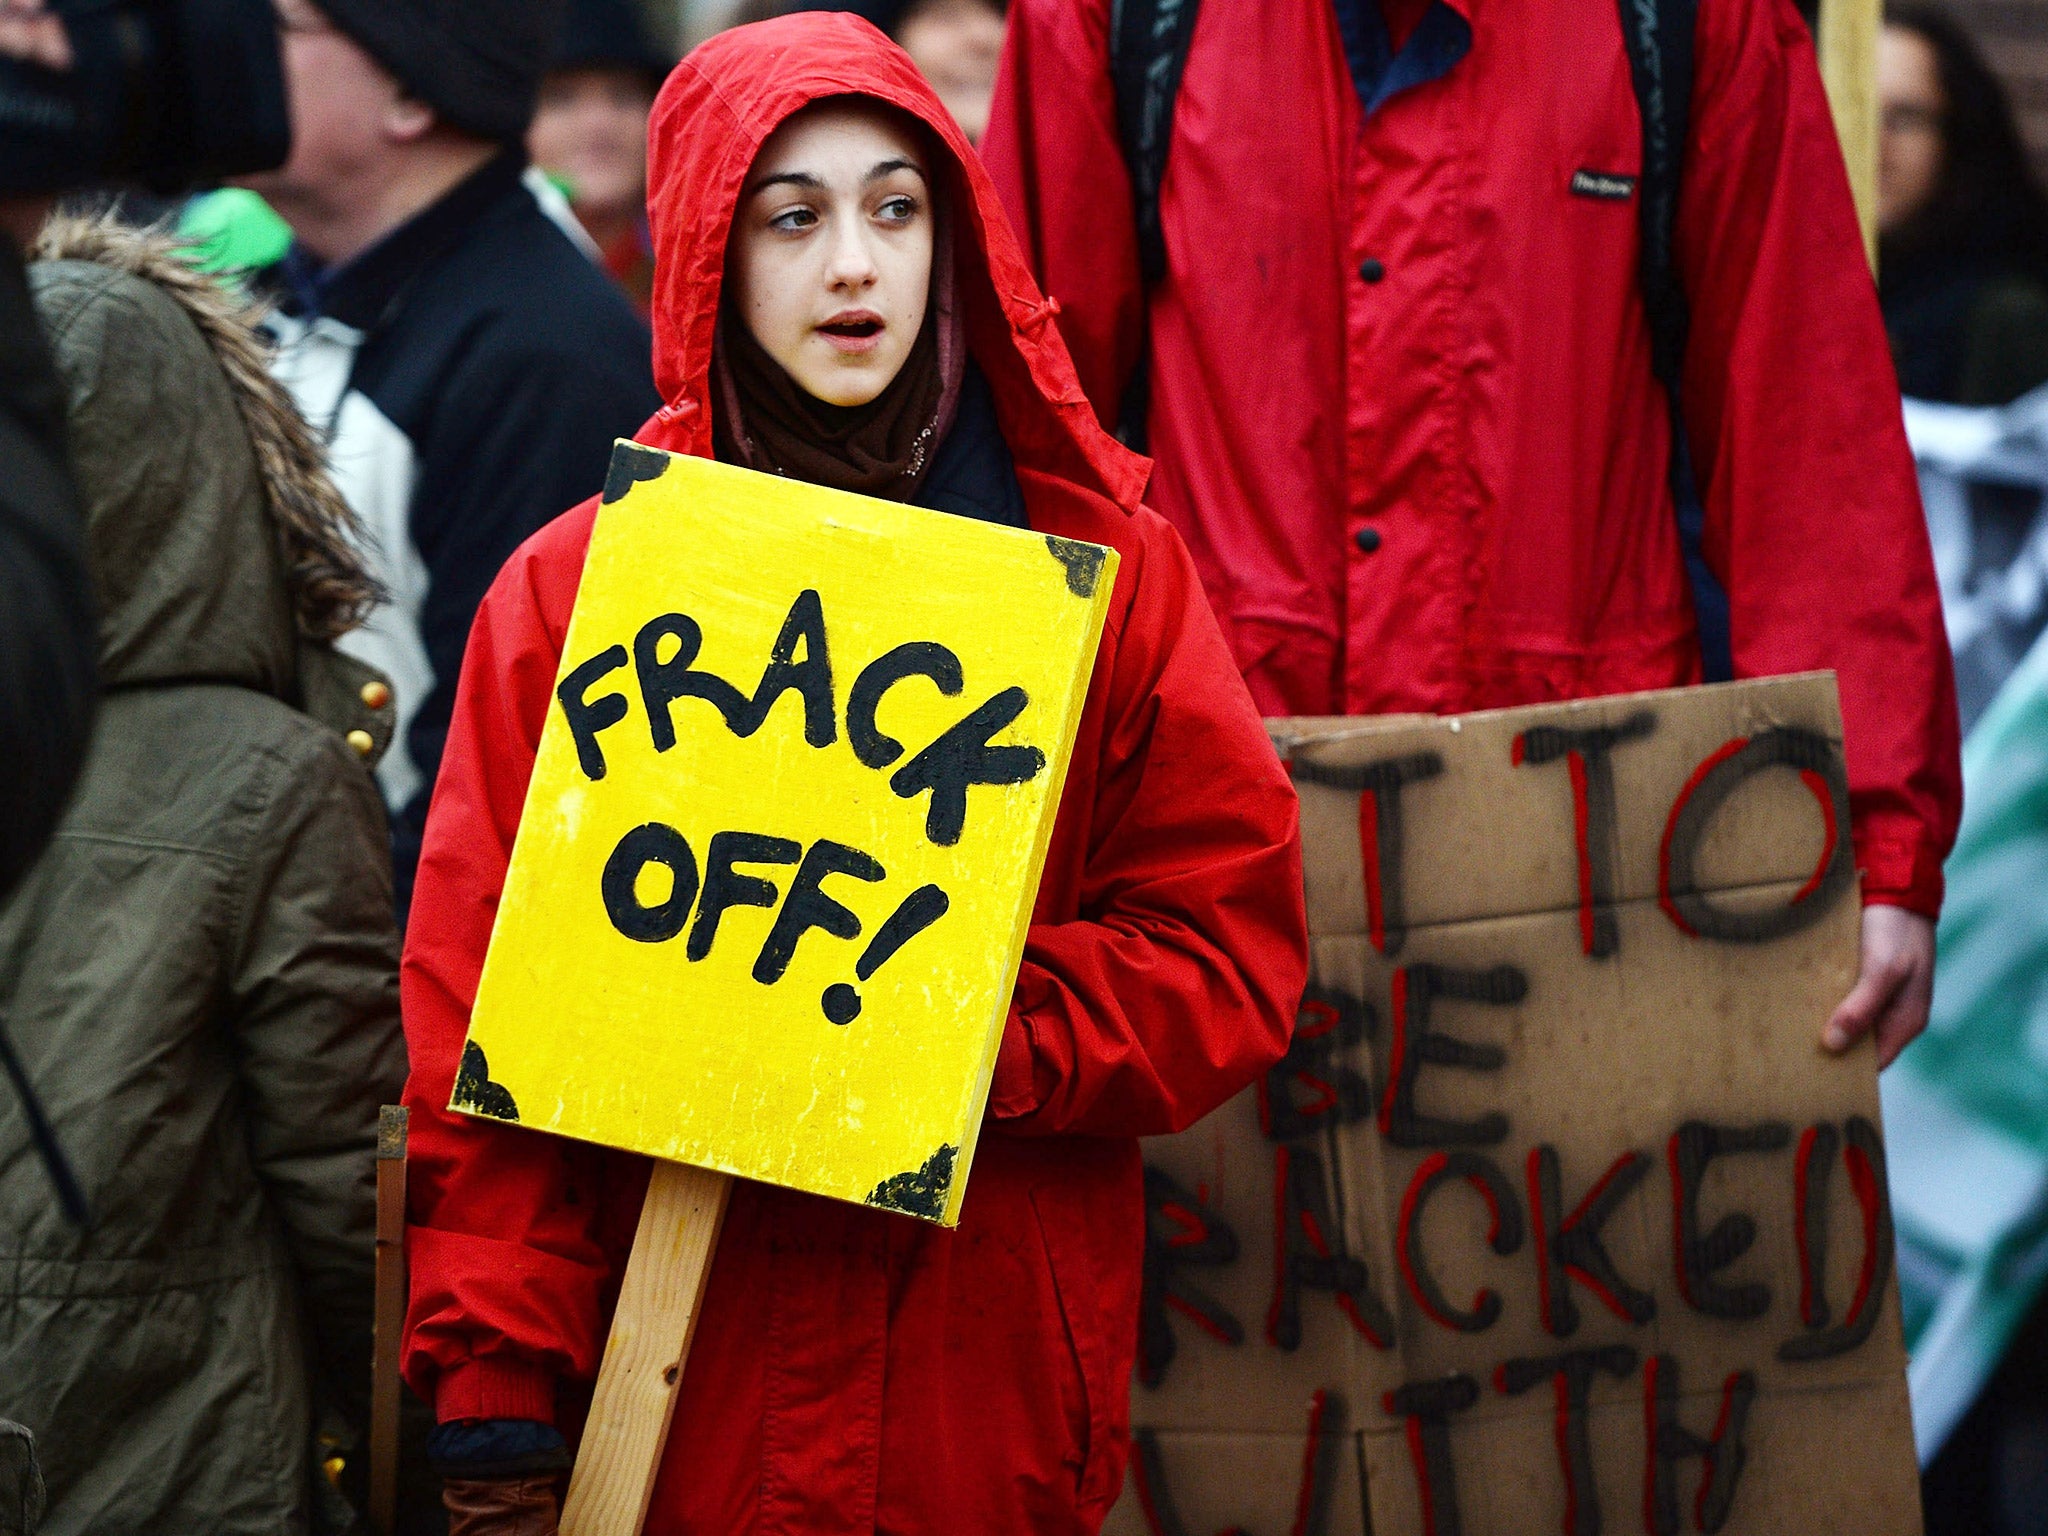 The Green Party is the only mainstream party that wish to scrap fracking altogether